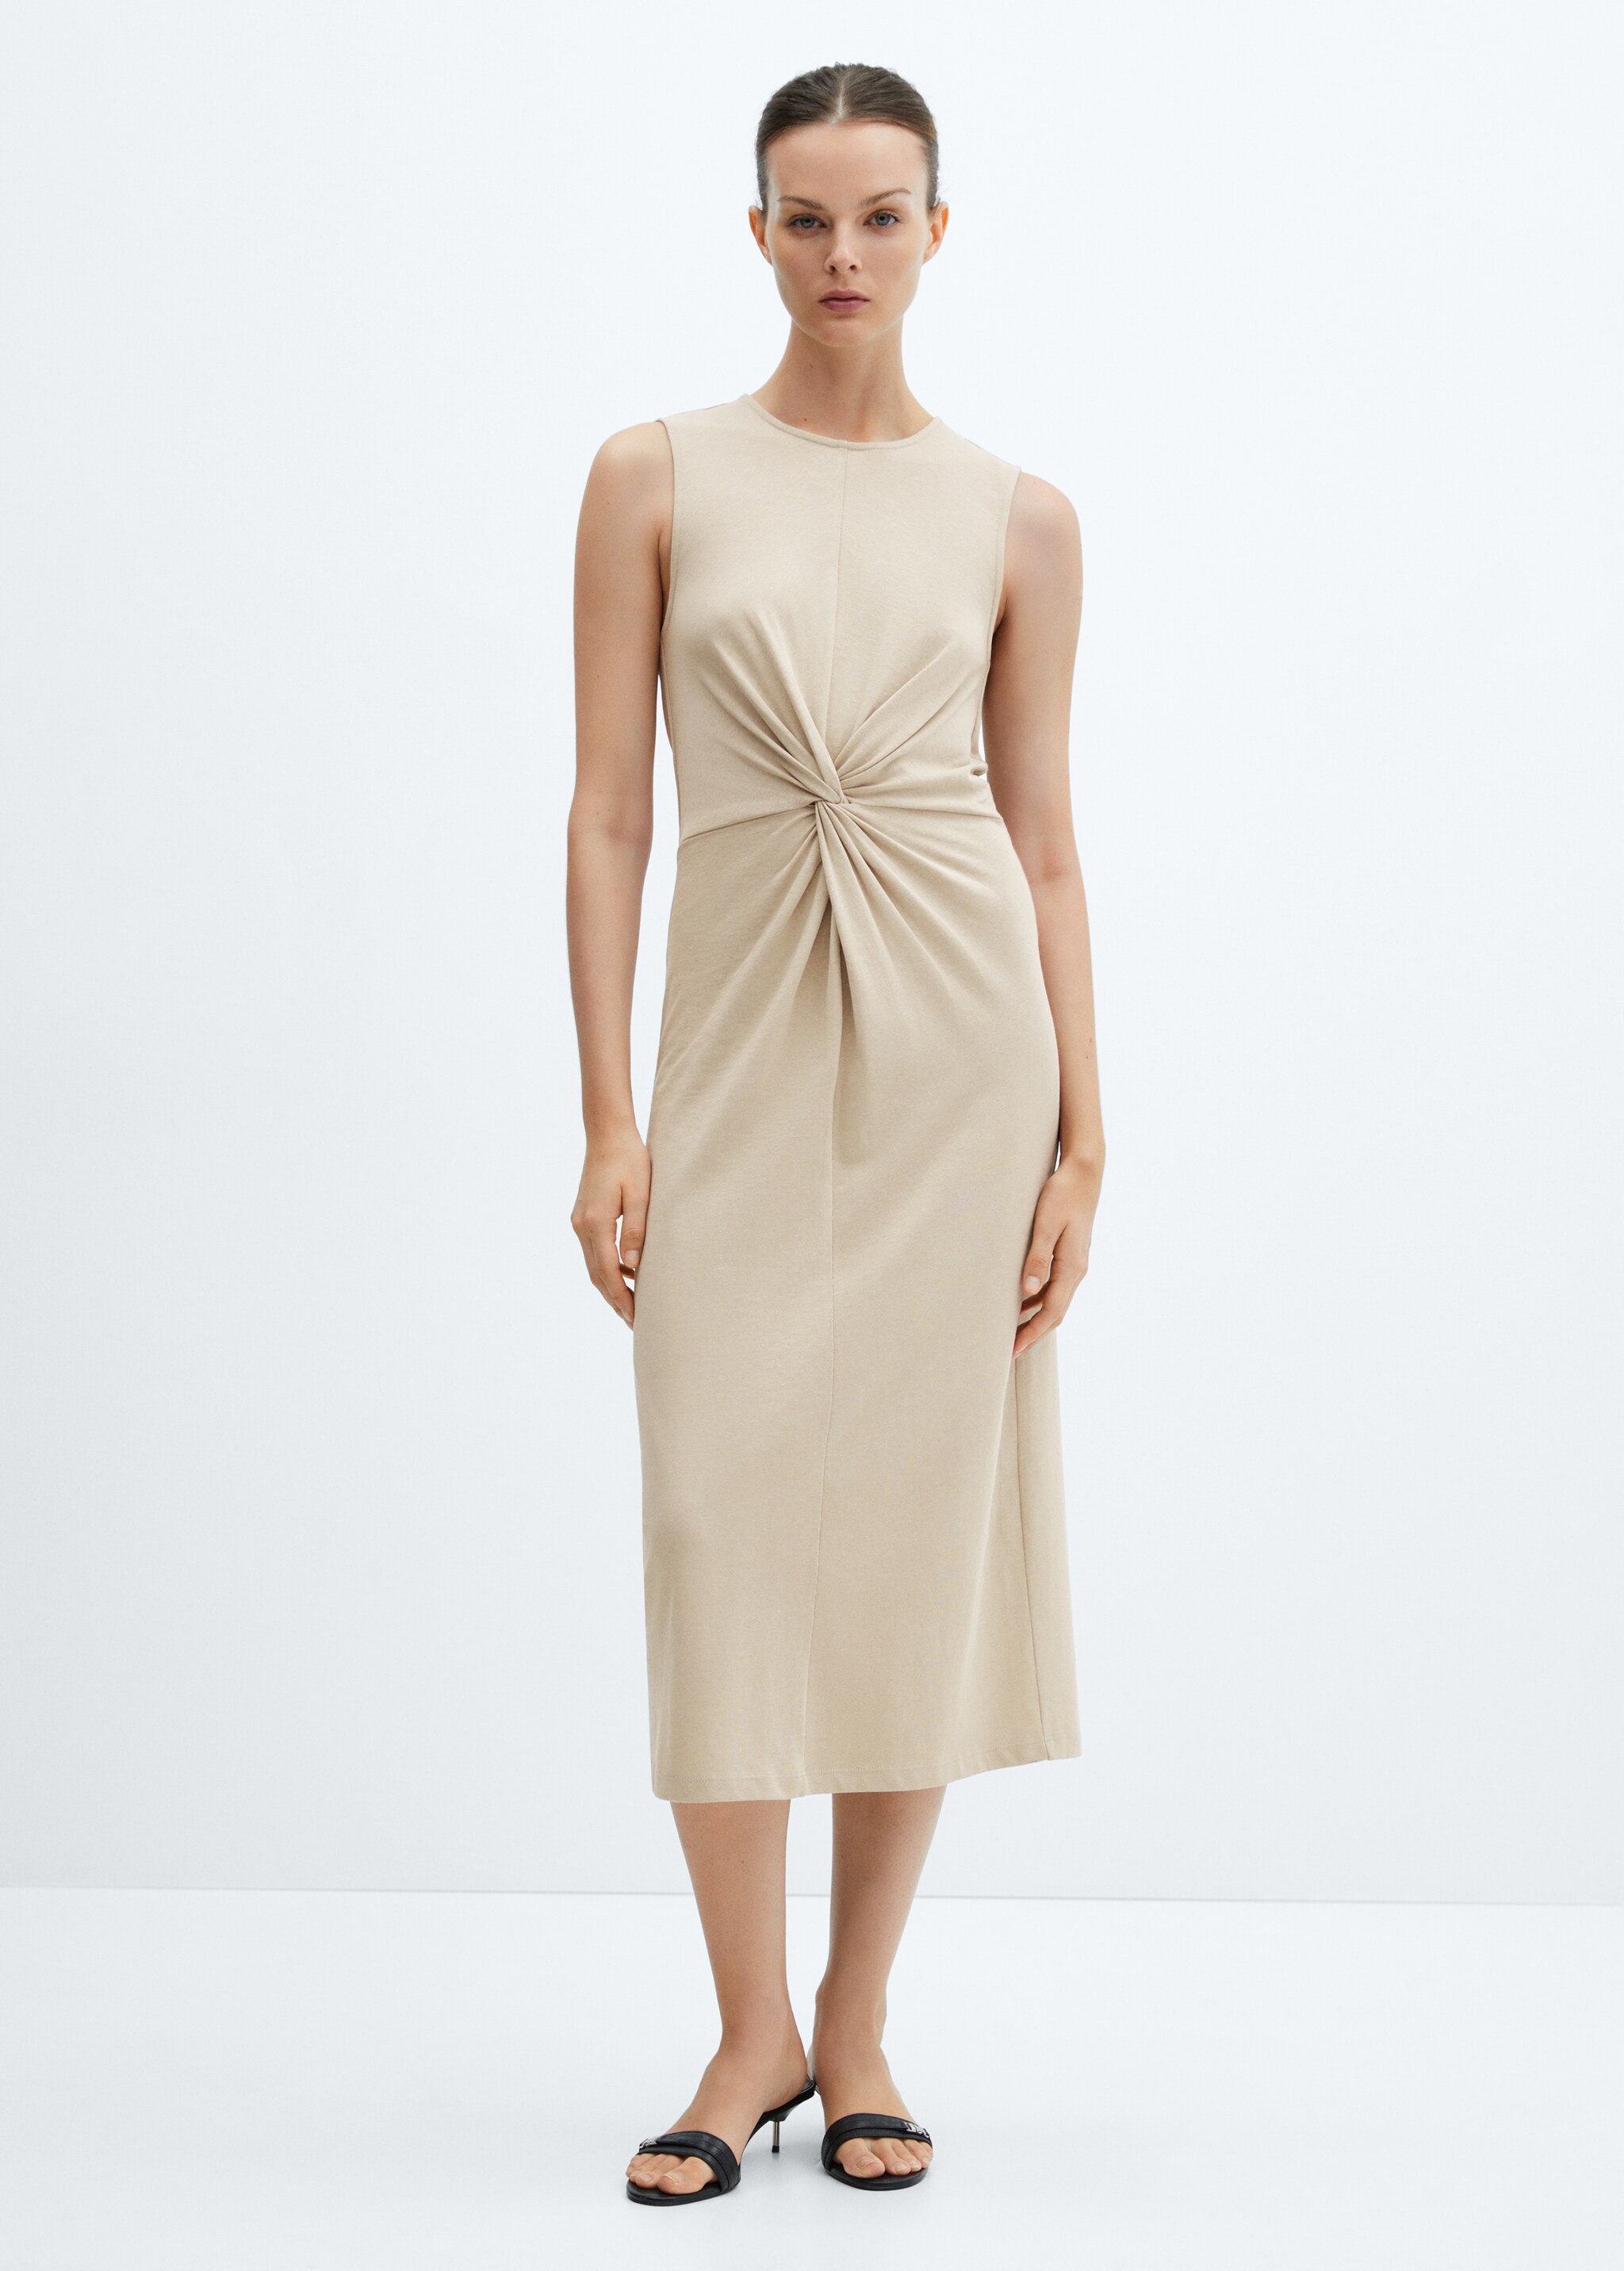 Knotted cotton dress - General plane